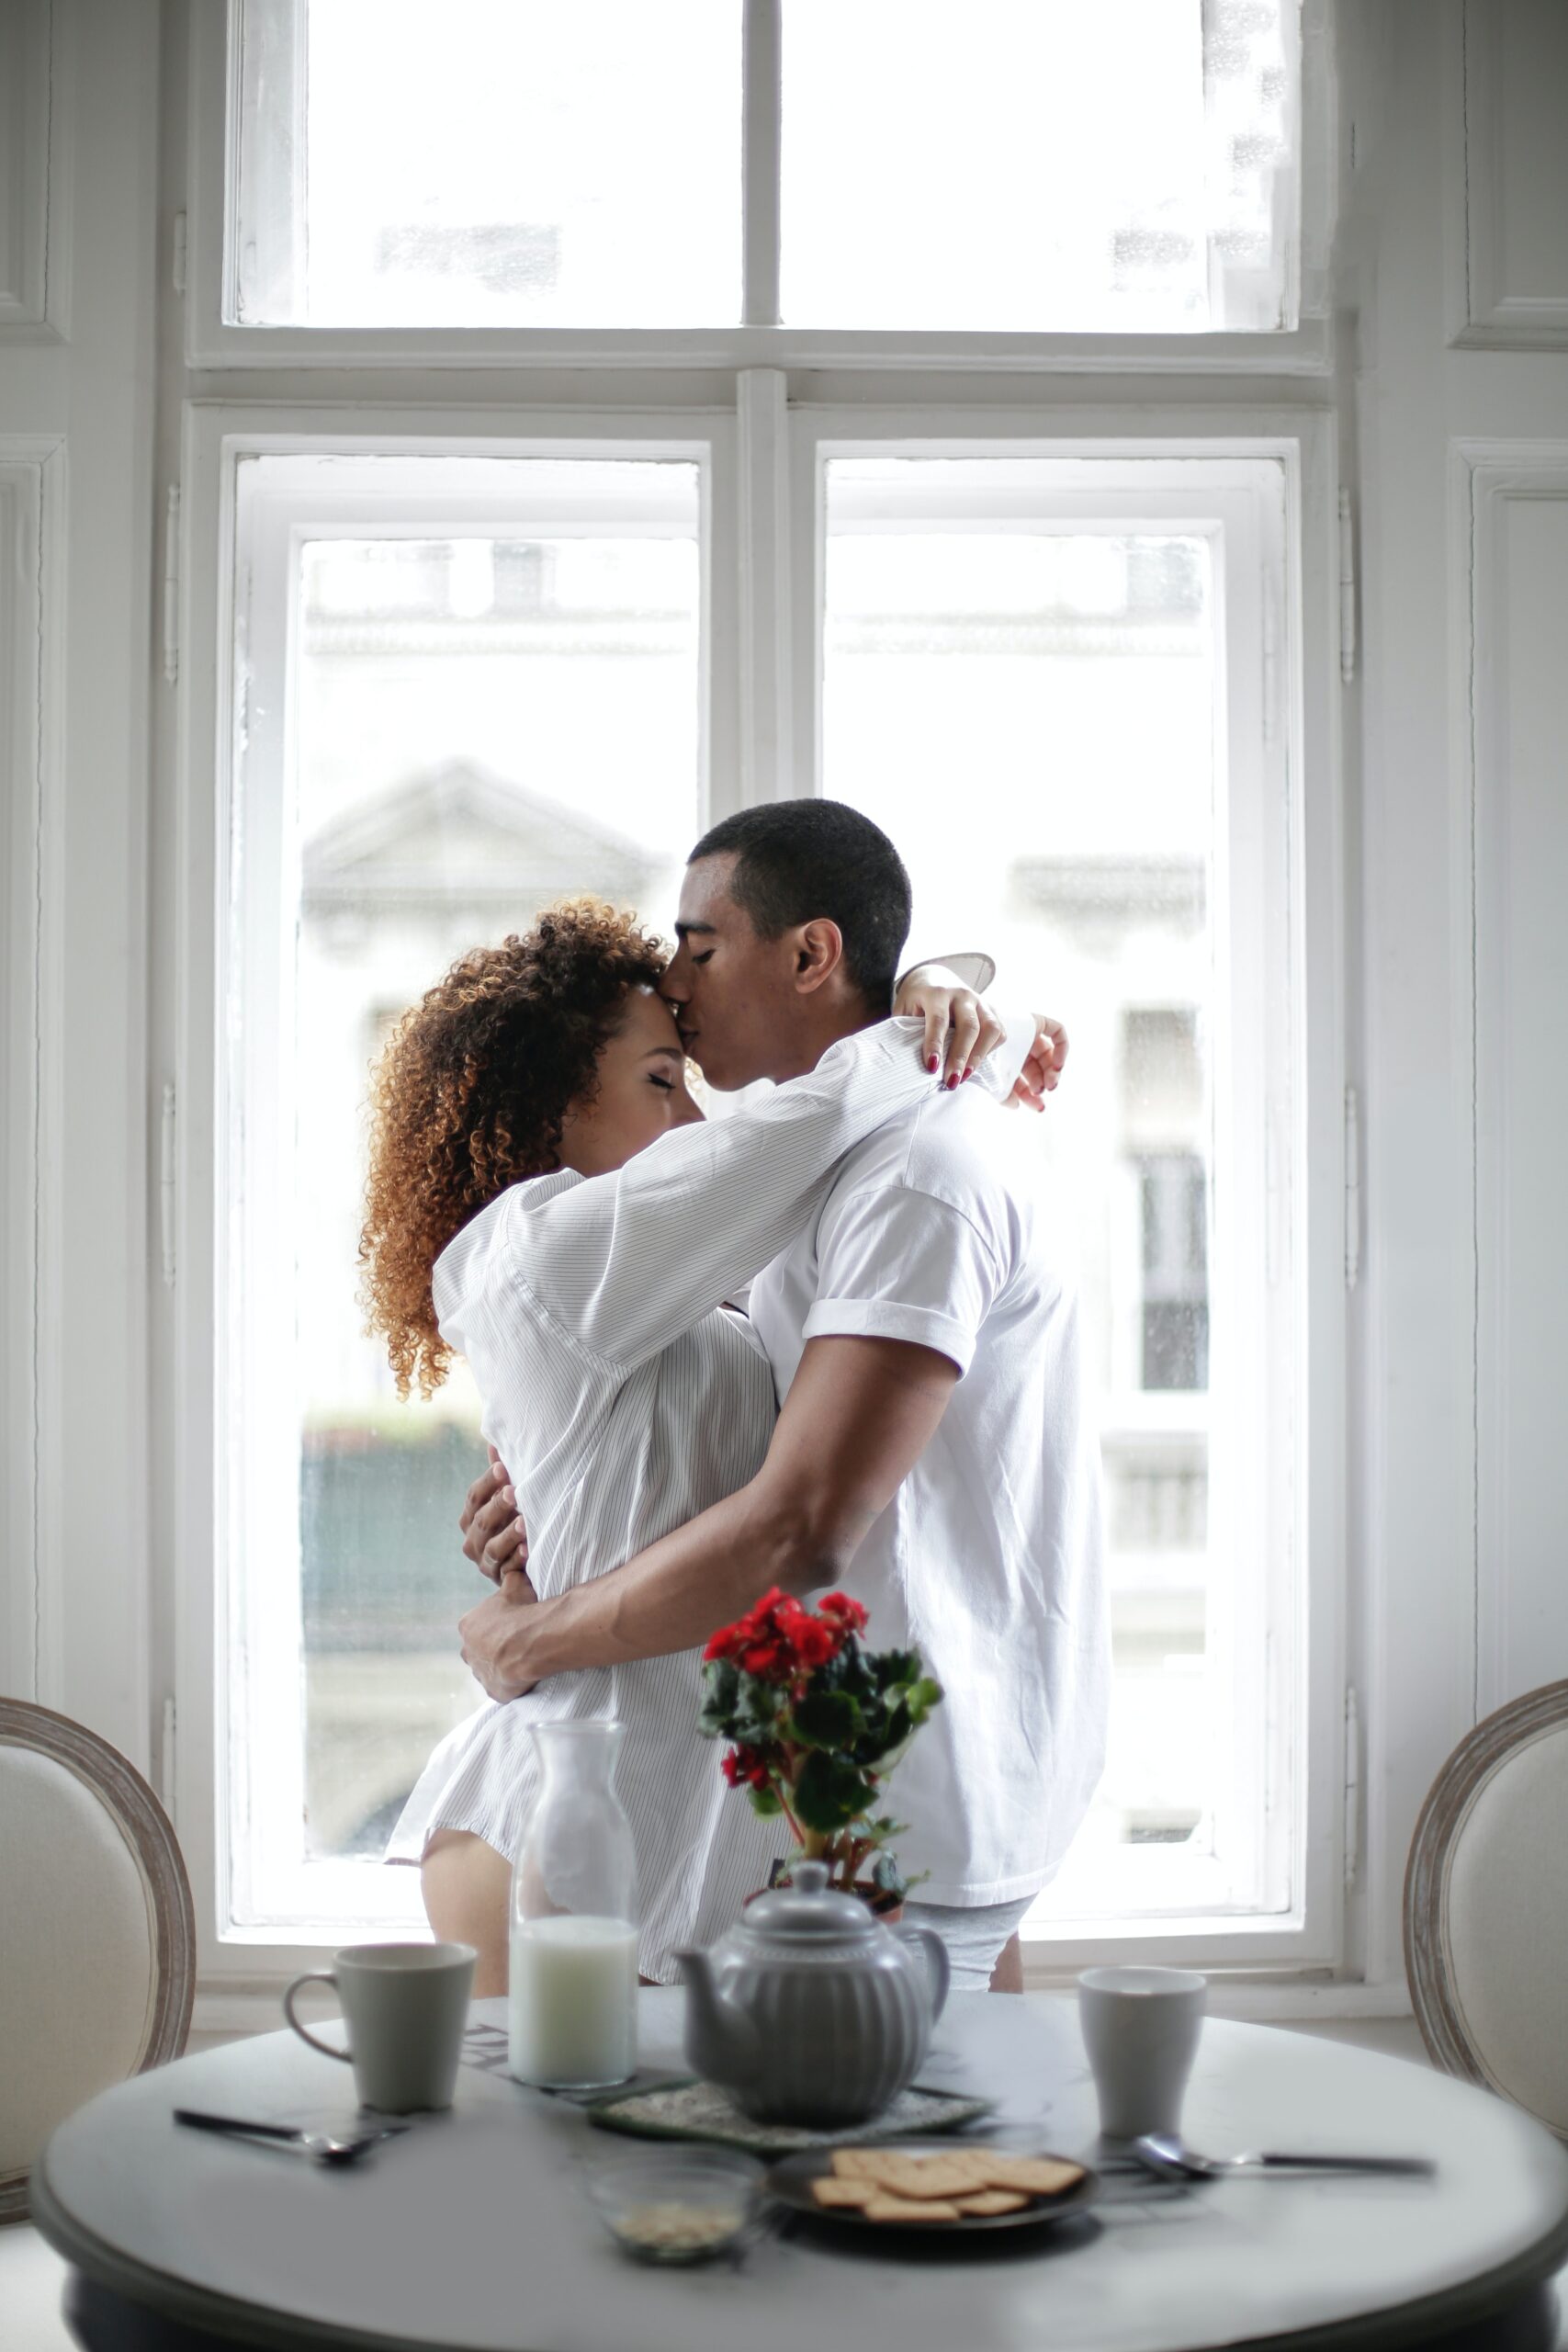 FORMS OF INTIMACY AMONG COUPLES